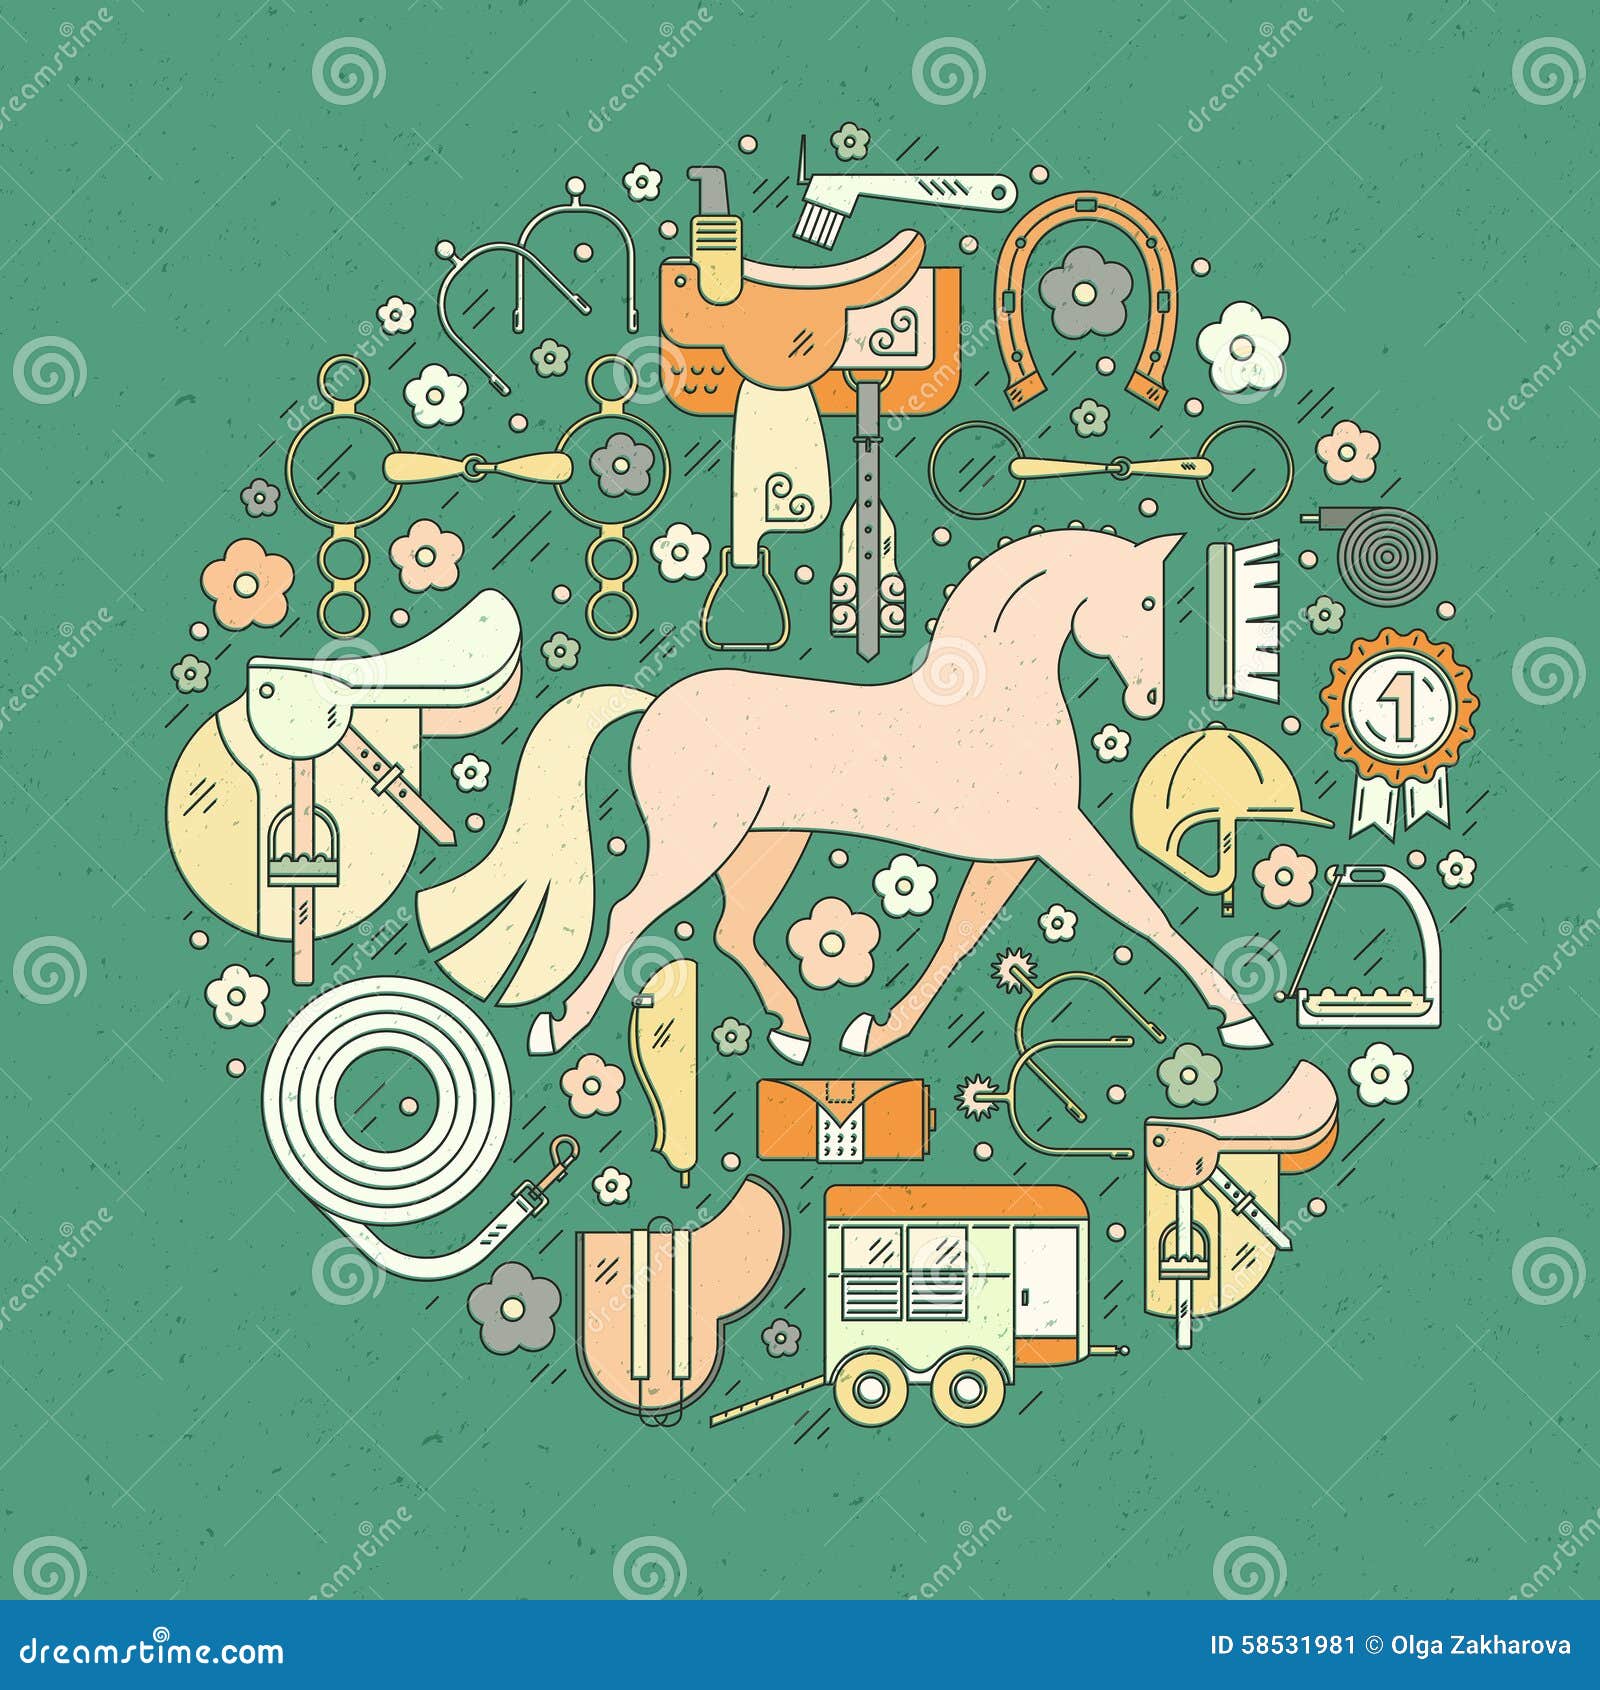 Equine Concept stock vector. Illustration of brush, collection - 58531981